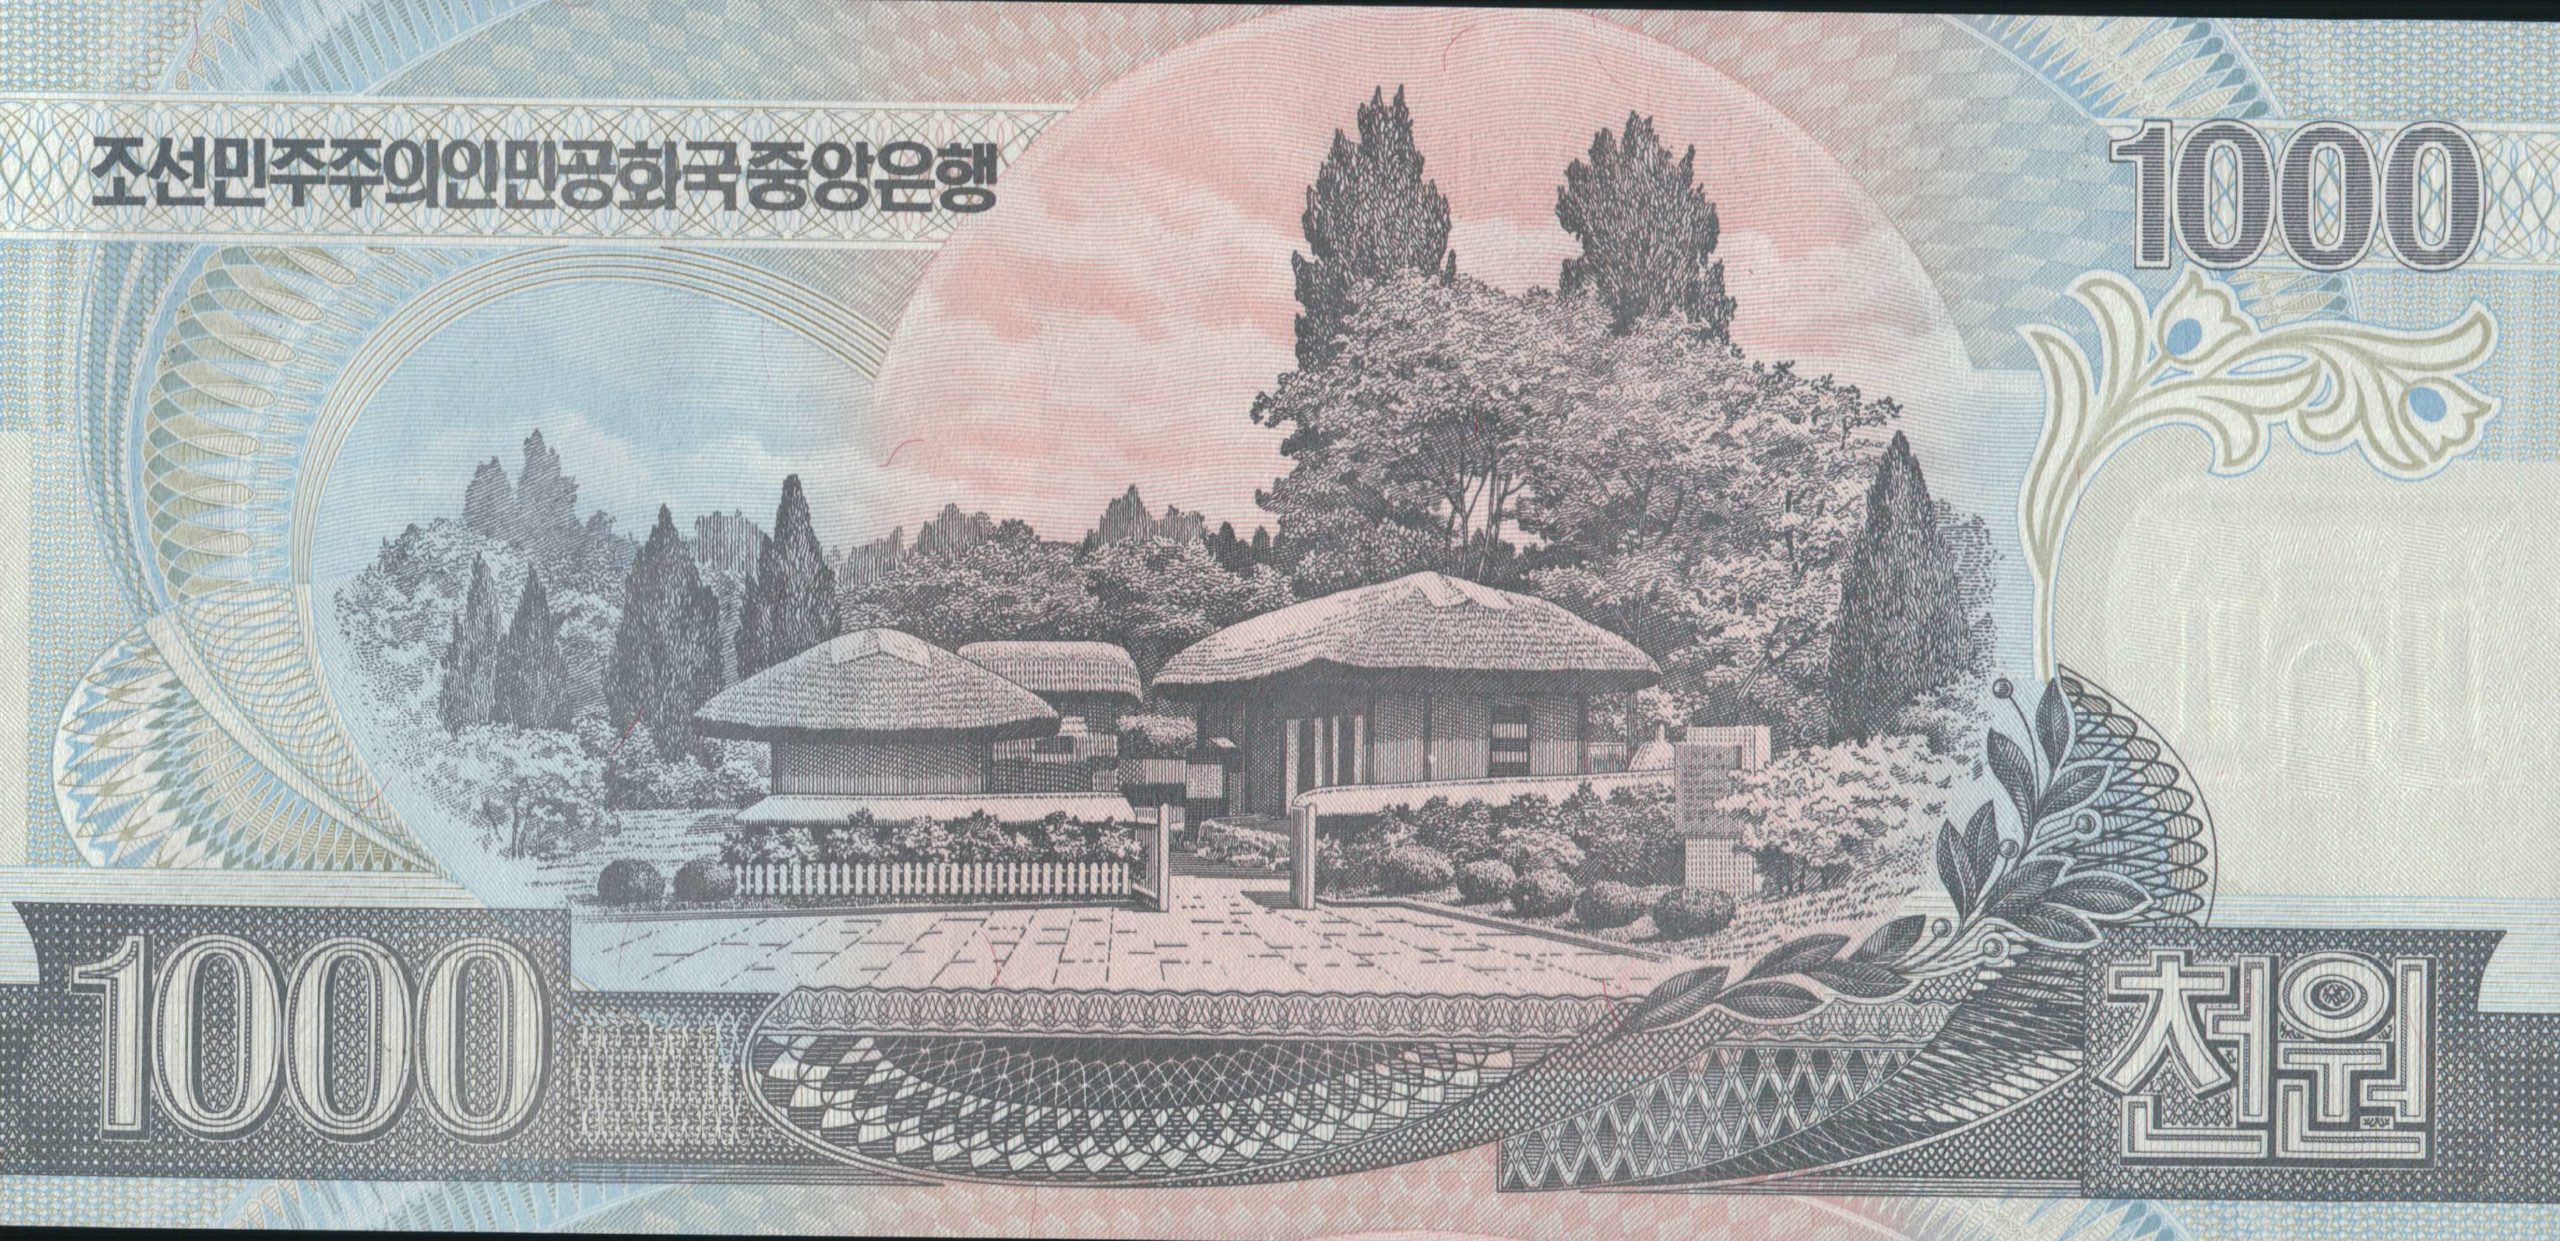 North Korean Currency